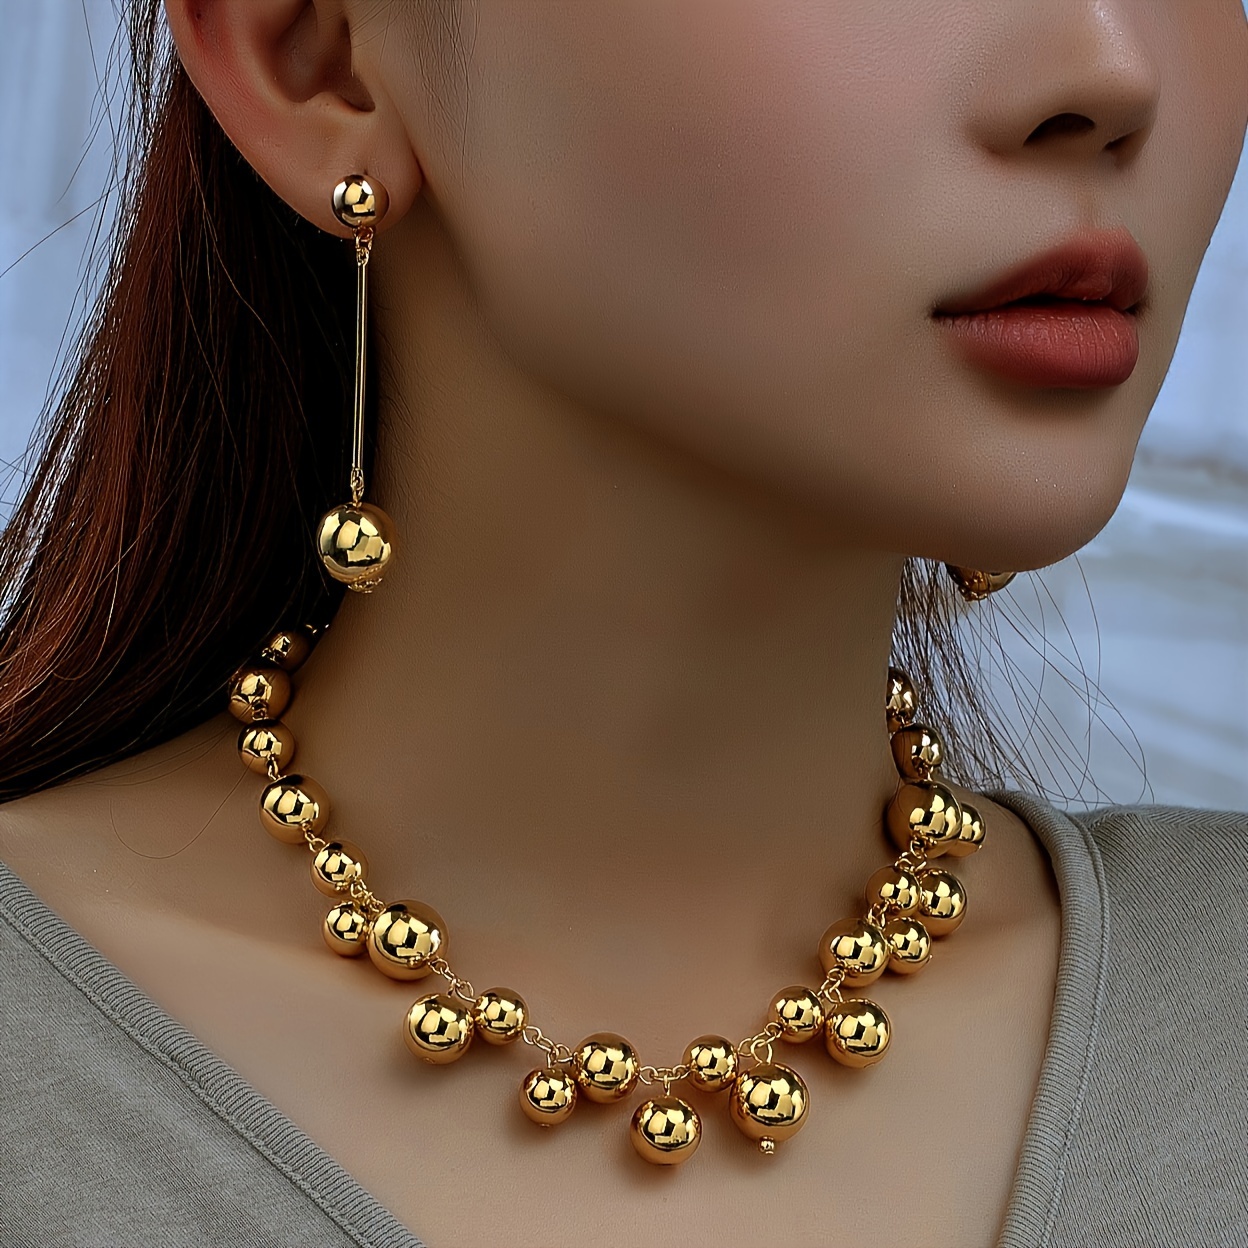 

Golden Chunky Bead Jewelry Set, Vintage Style, Luxury Noble Dangle Earrings And Necklace Combo, High-fashion Statement Pieces For Women